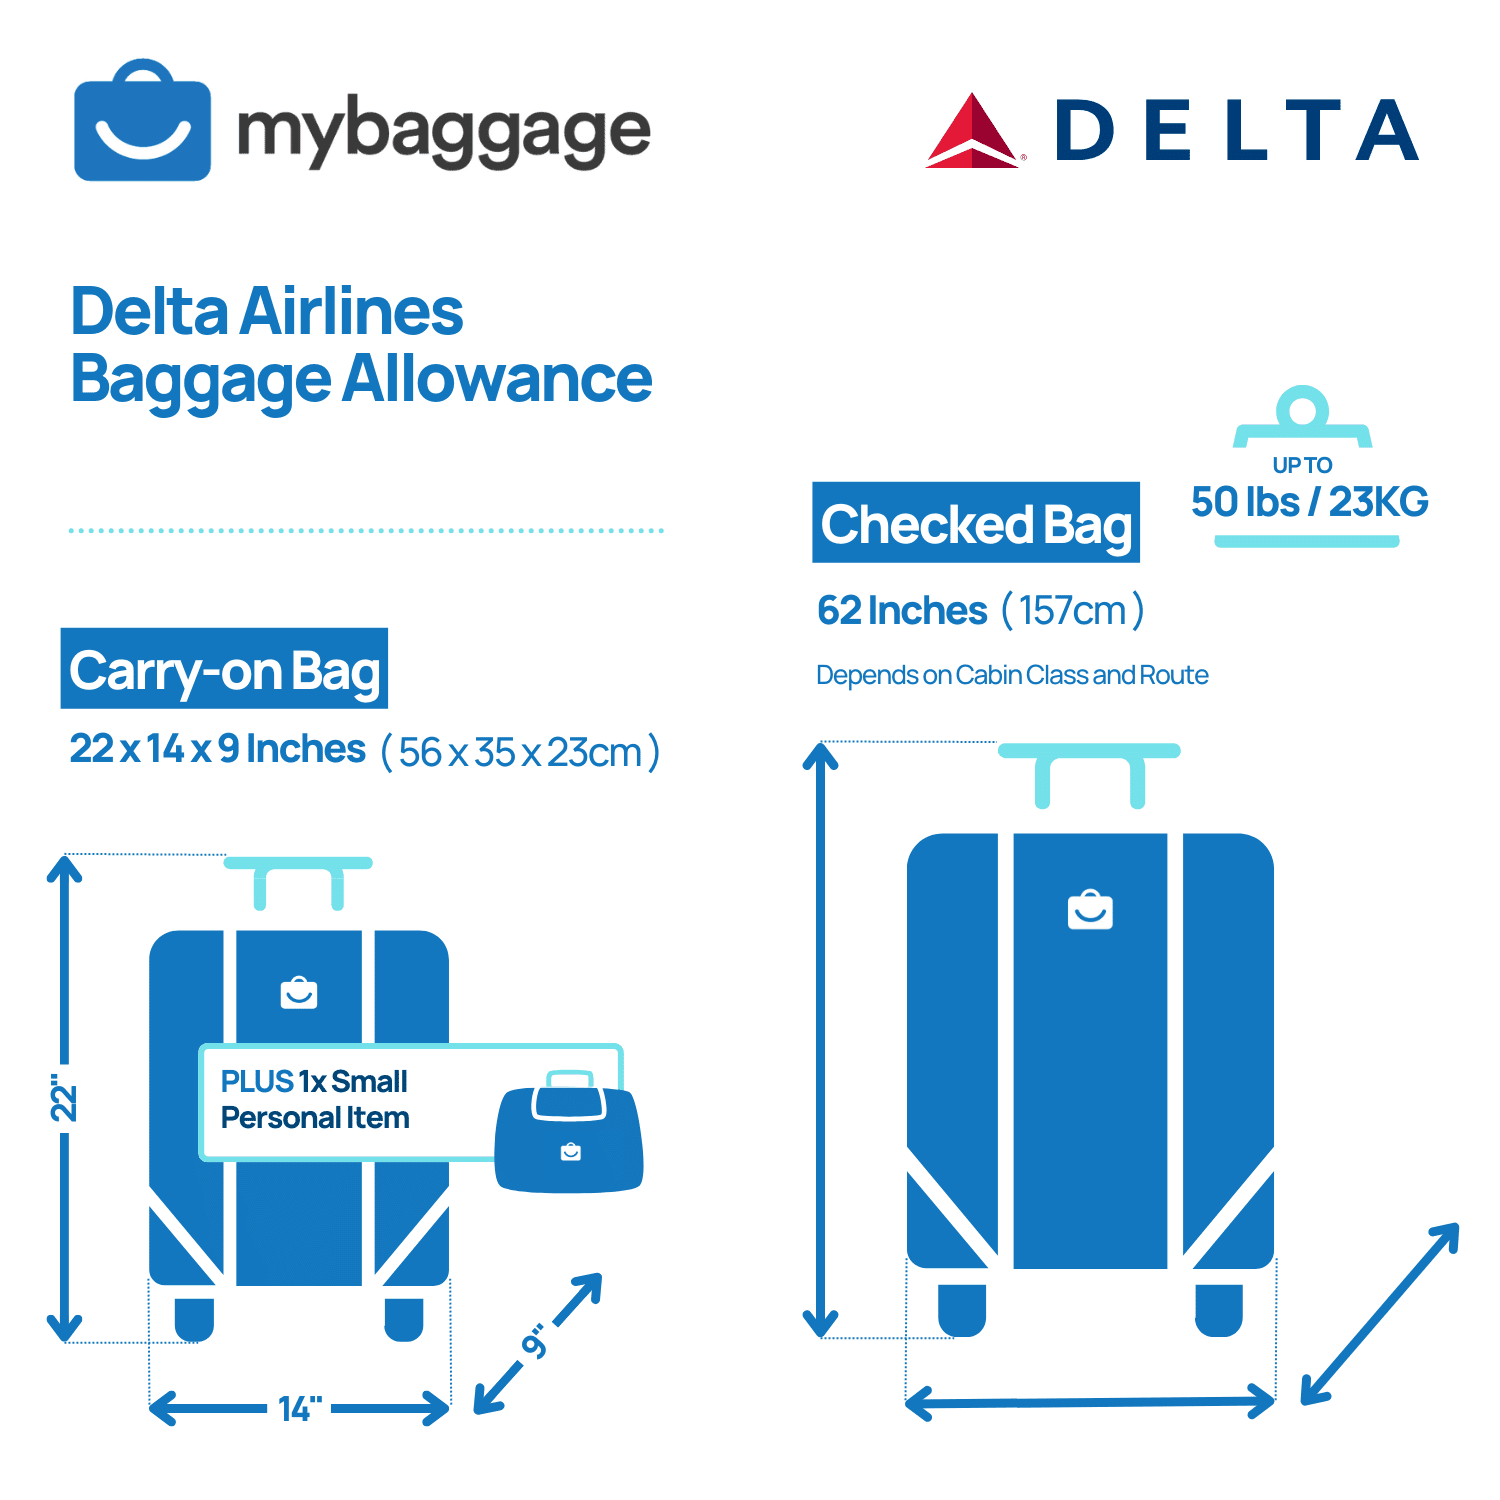 My Baggage - Delta Airlines Baggage Allowance